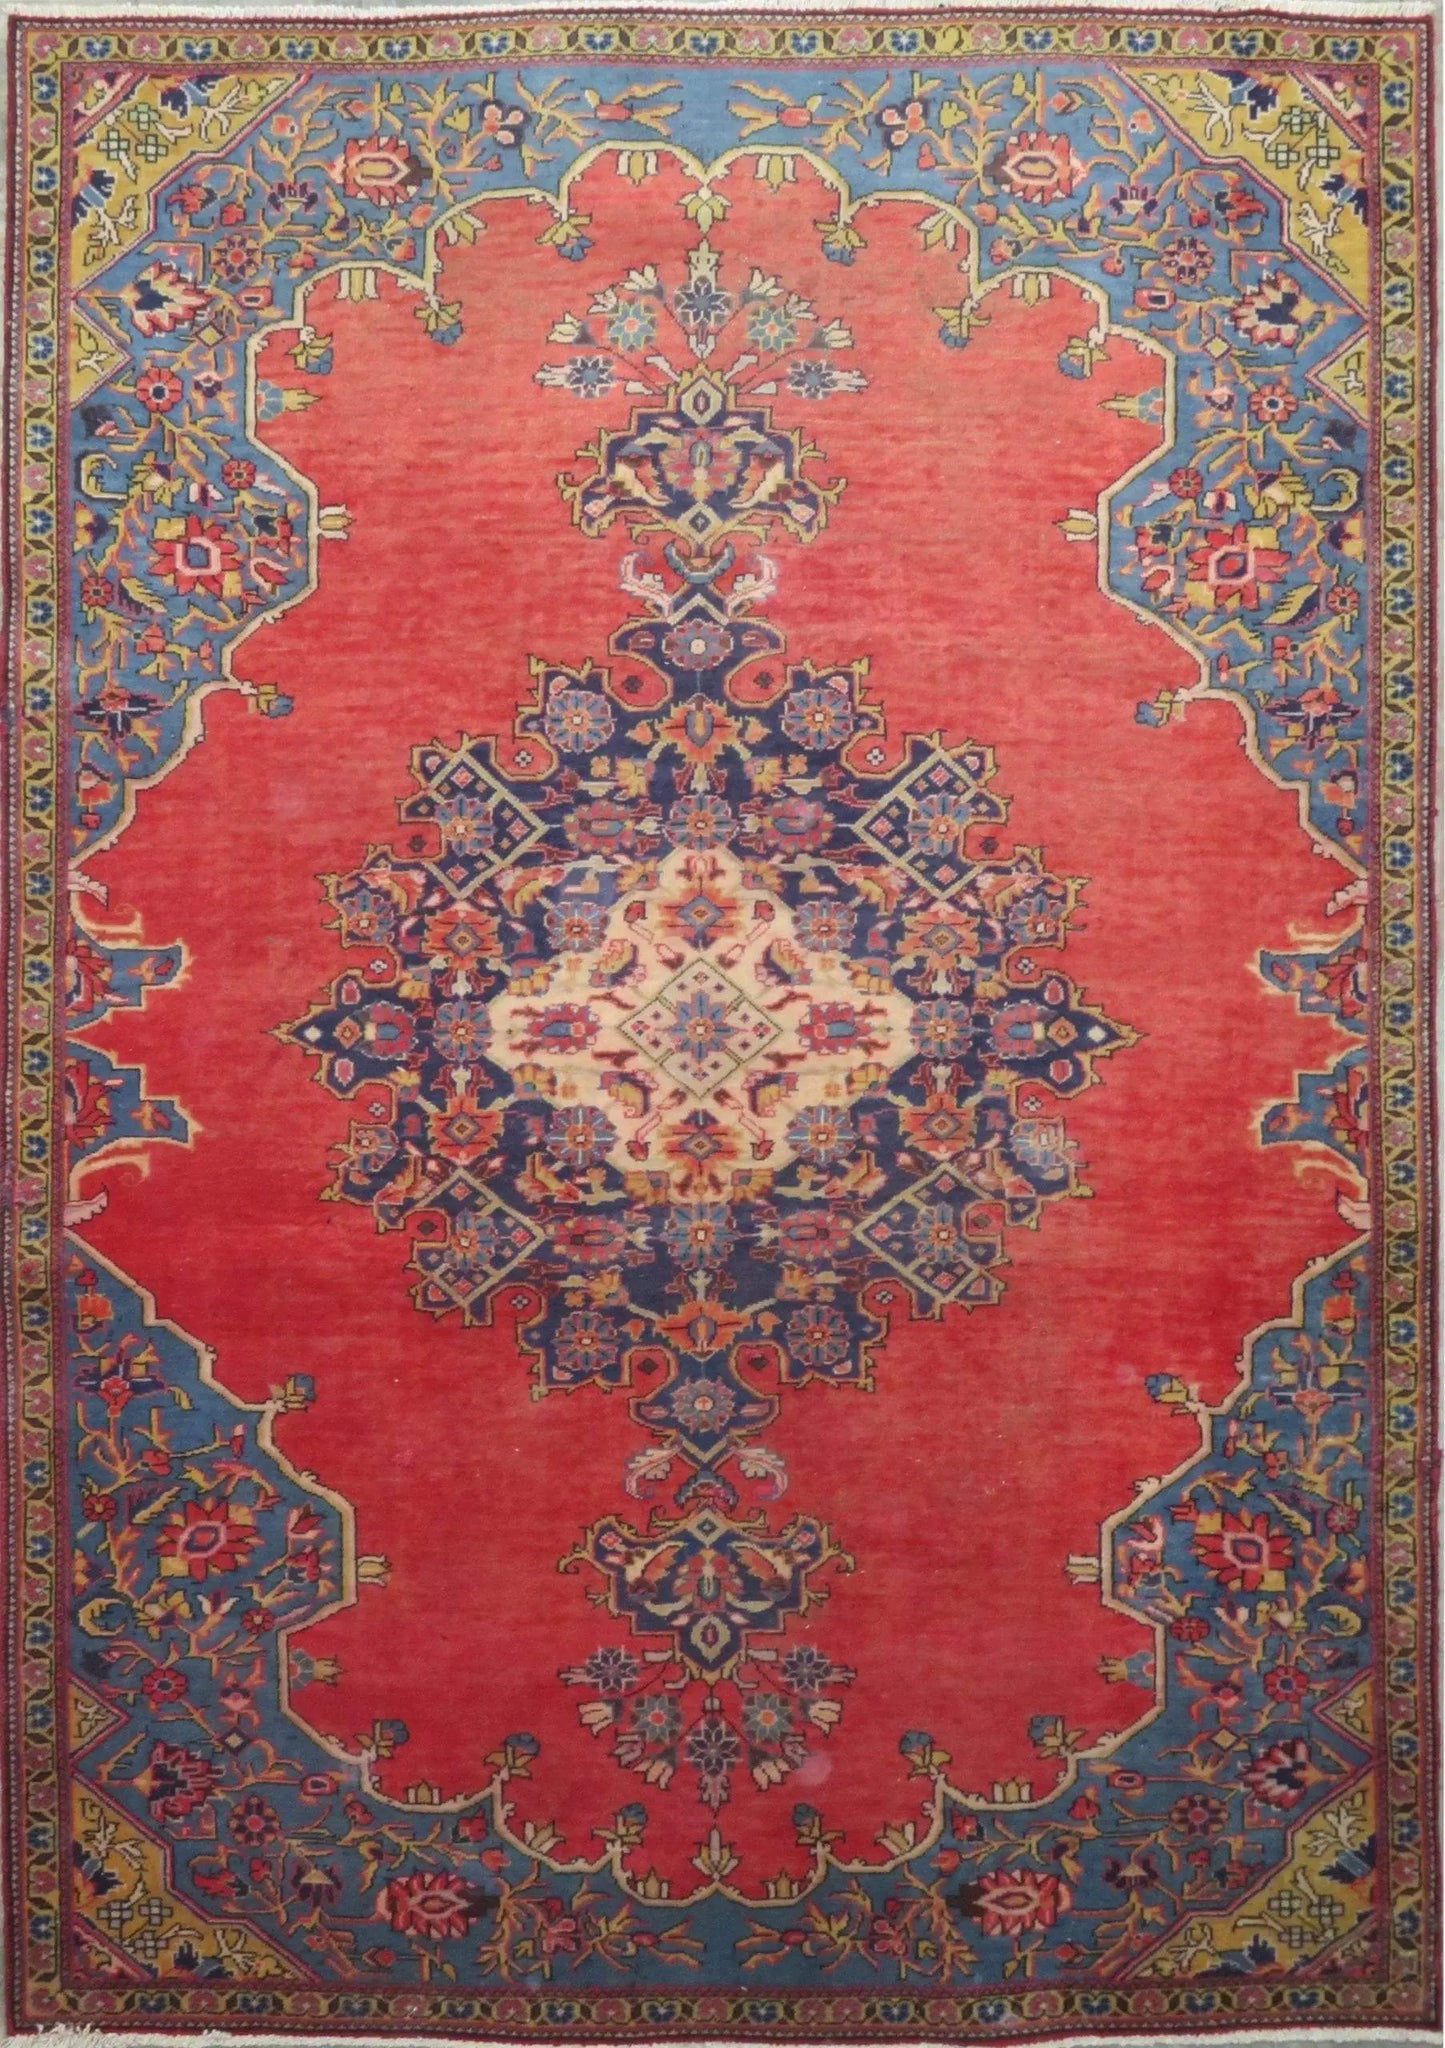 Hand-Knotted Persian Wool Rug _ Luxurious Vintage Design, 7'9" x 5'5", Artisan Crafted